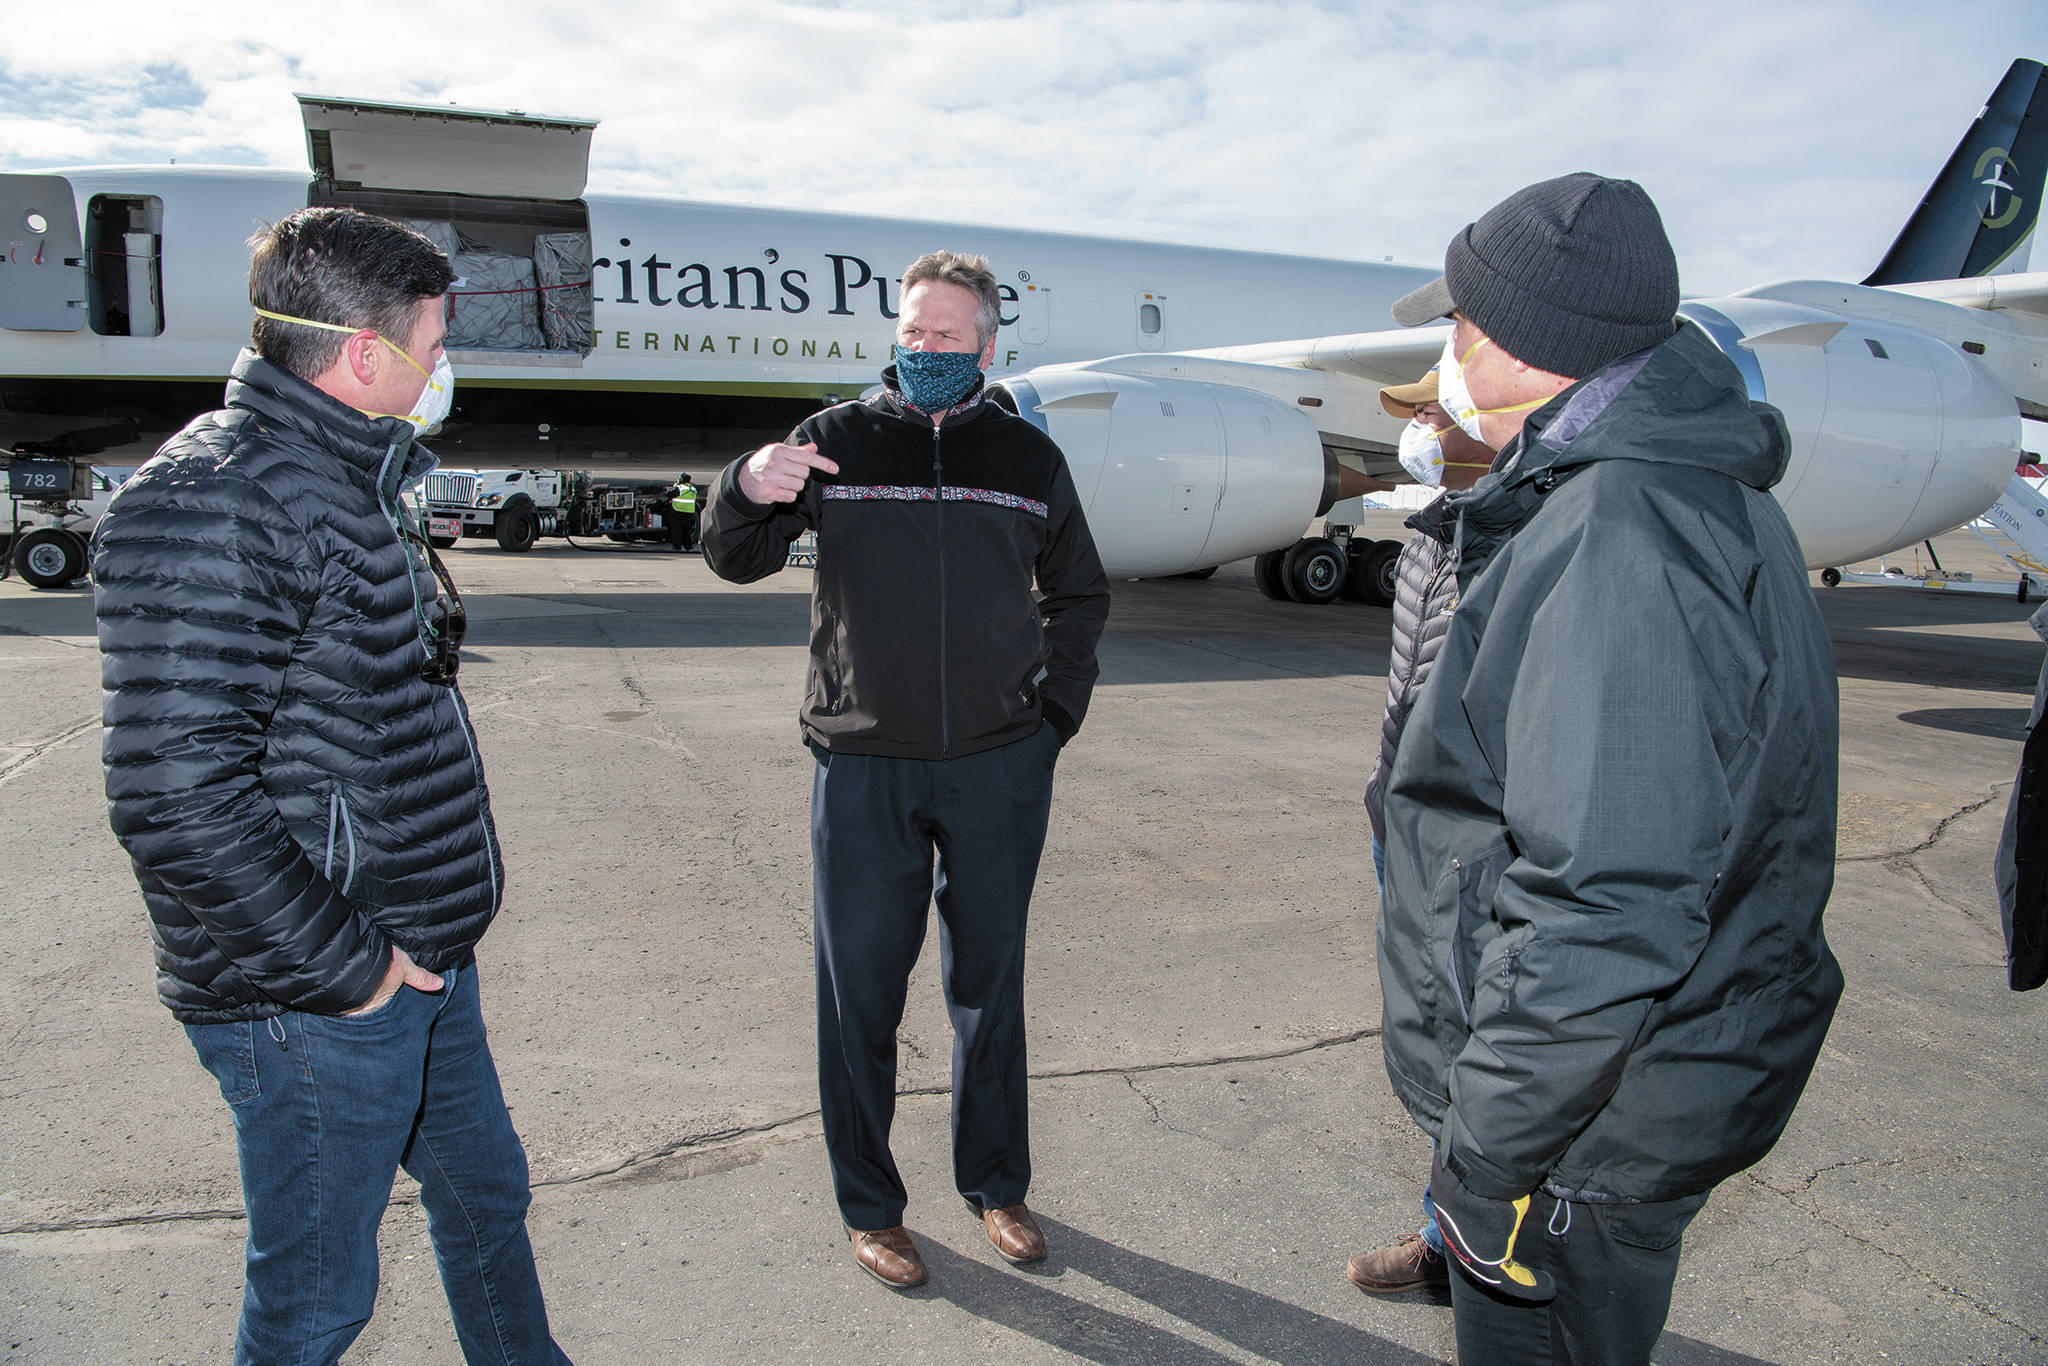 Gov. Mike Dunleavy (center) speaks with Edward Graham (left) of Samaritan’s Purse as two other Samaritan’s Purse staff members look on, Monday, April 6, 2020 at Ted Stevens International Airport in Anchorage, Alaska. Dunleavy met the crew and staff of the Samaritan’s Purse DC-8 at the airport as they offloaded thousands of pounds of medical supplies bound for rural Alaska. (Photo courtesy Office of the Governor)